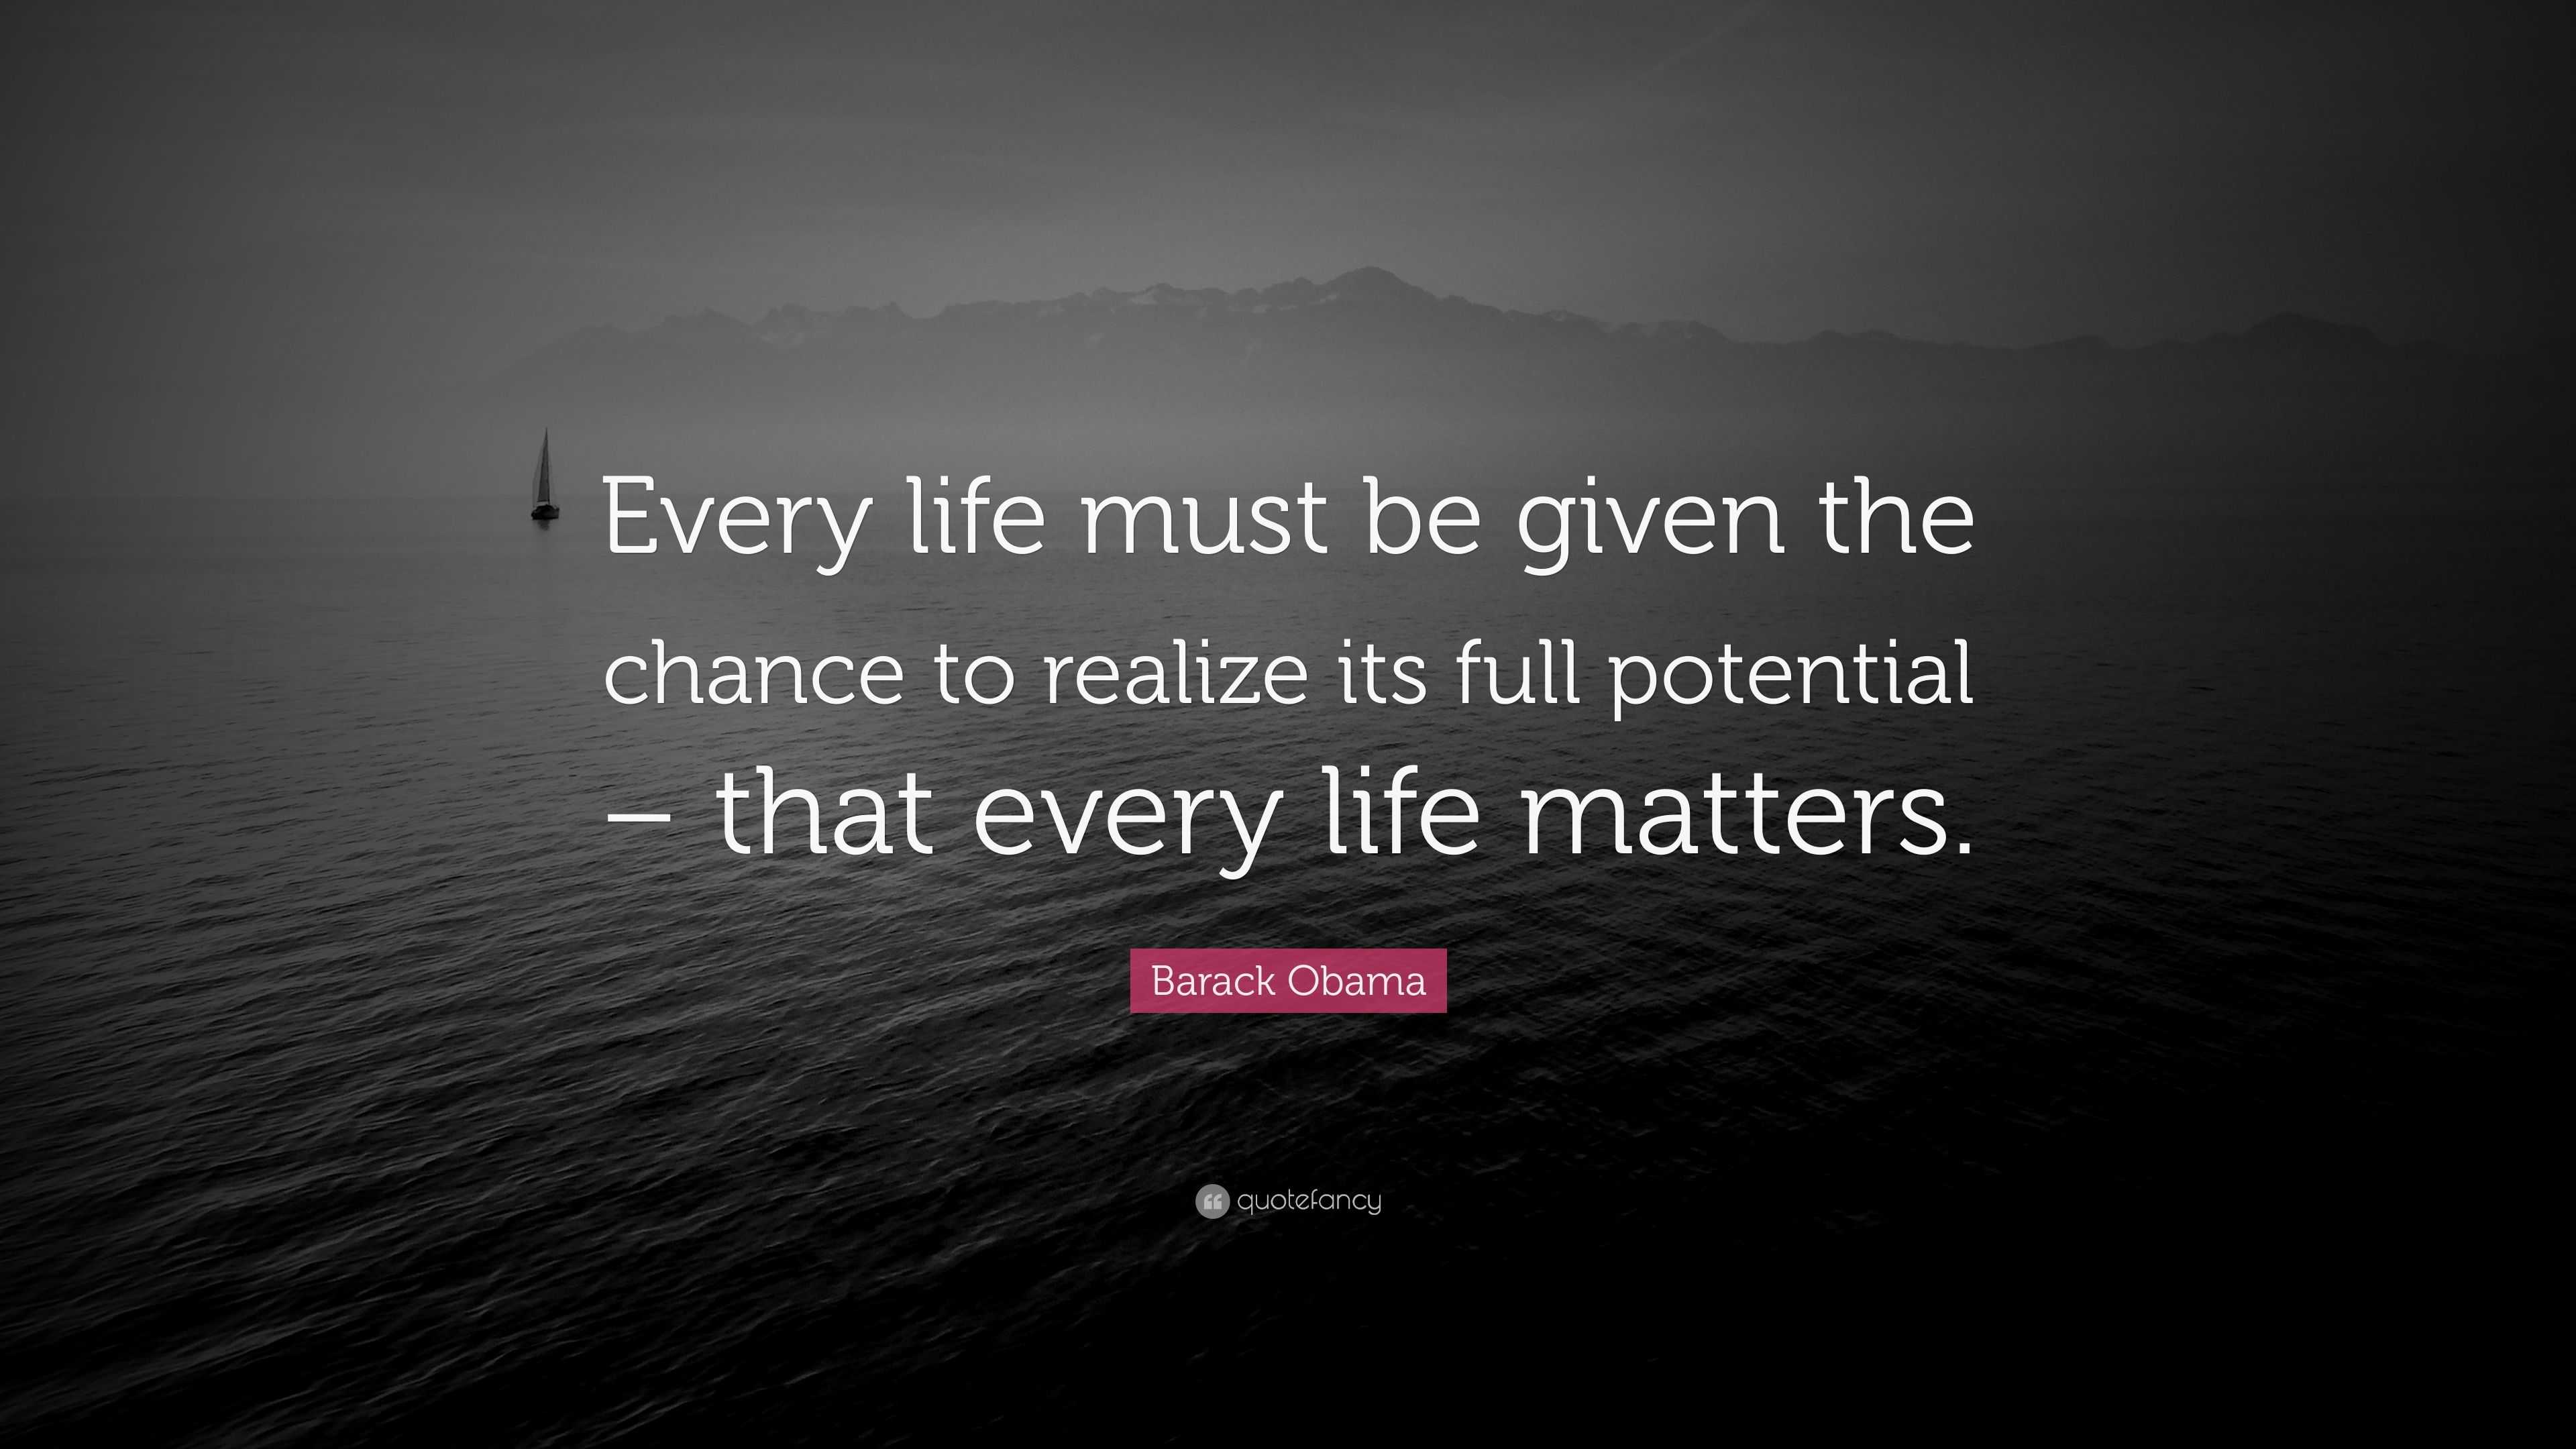 Barack Obama Quote: “Every life must be given the chance to realize its ...